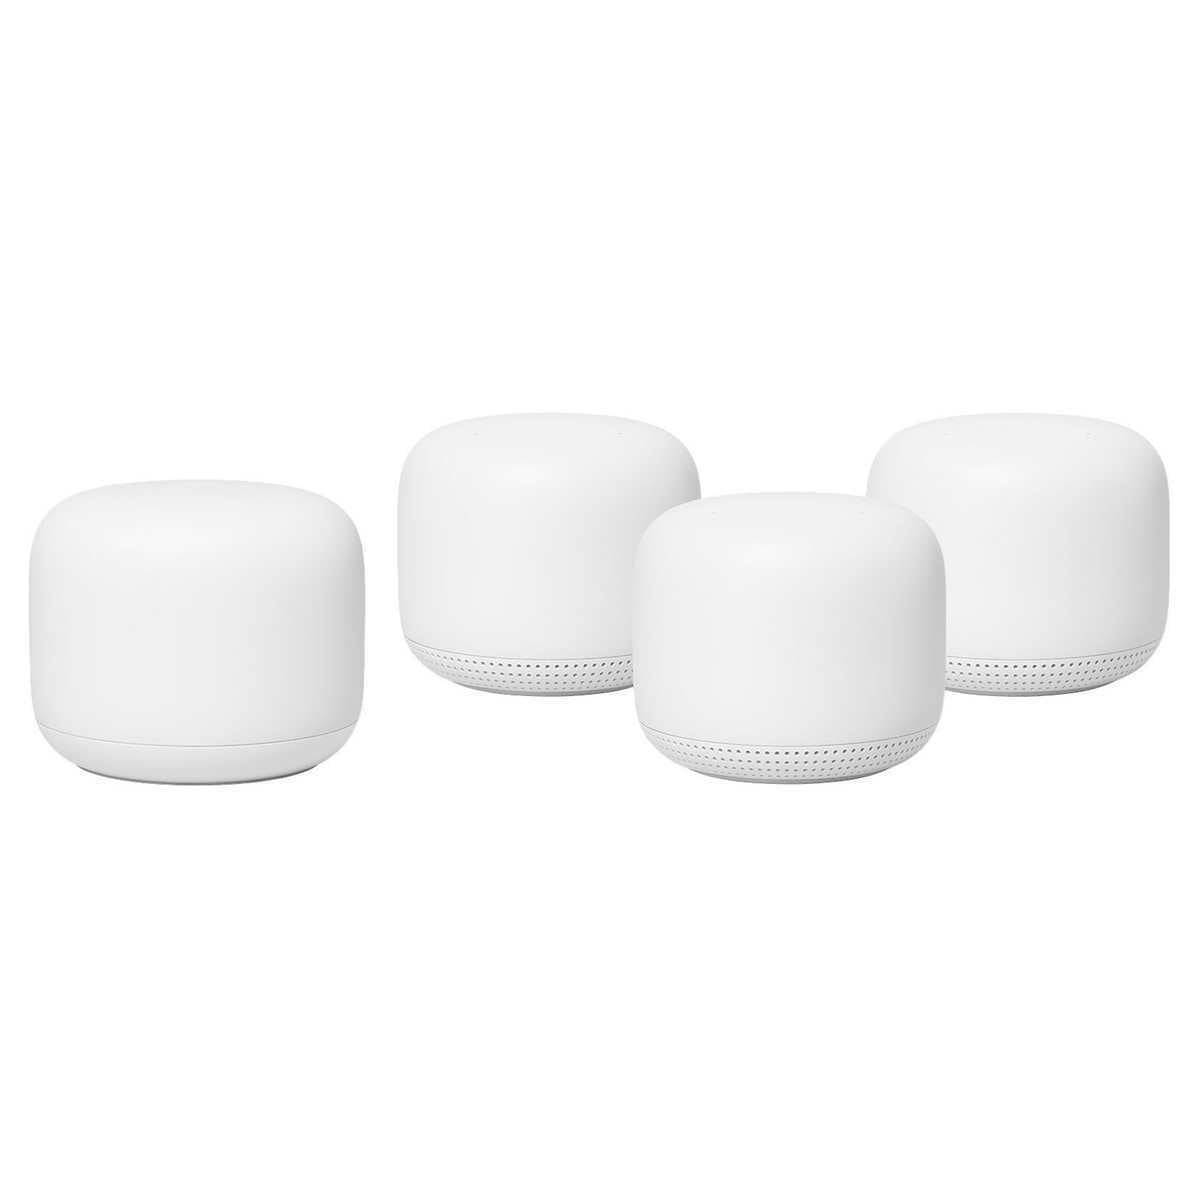 Google Nest Wifi 4-Pack Smart WiFi Powered by the Google Assistant 